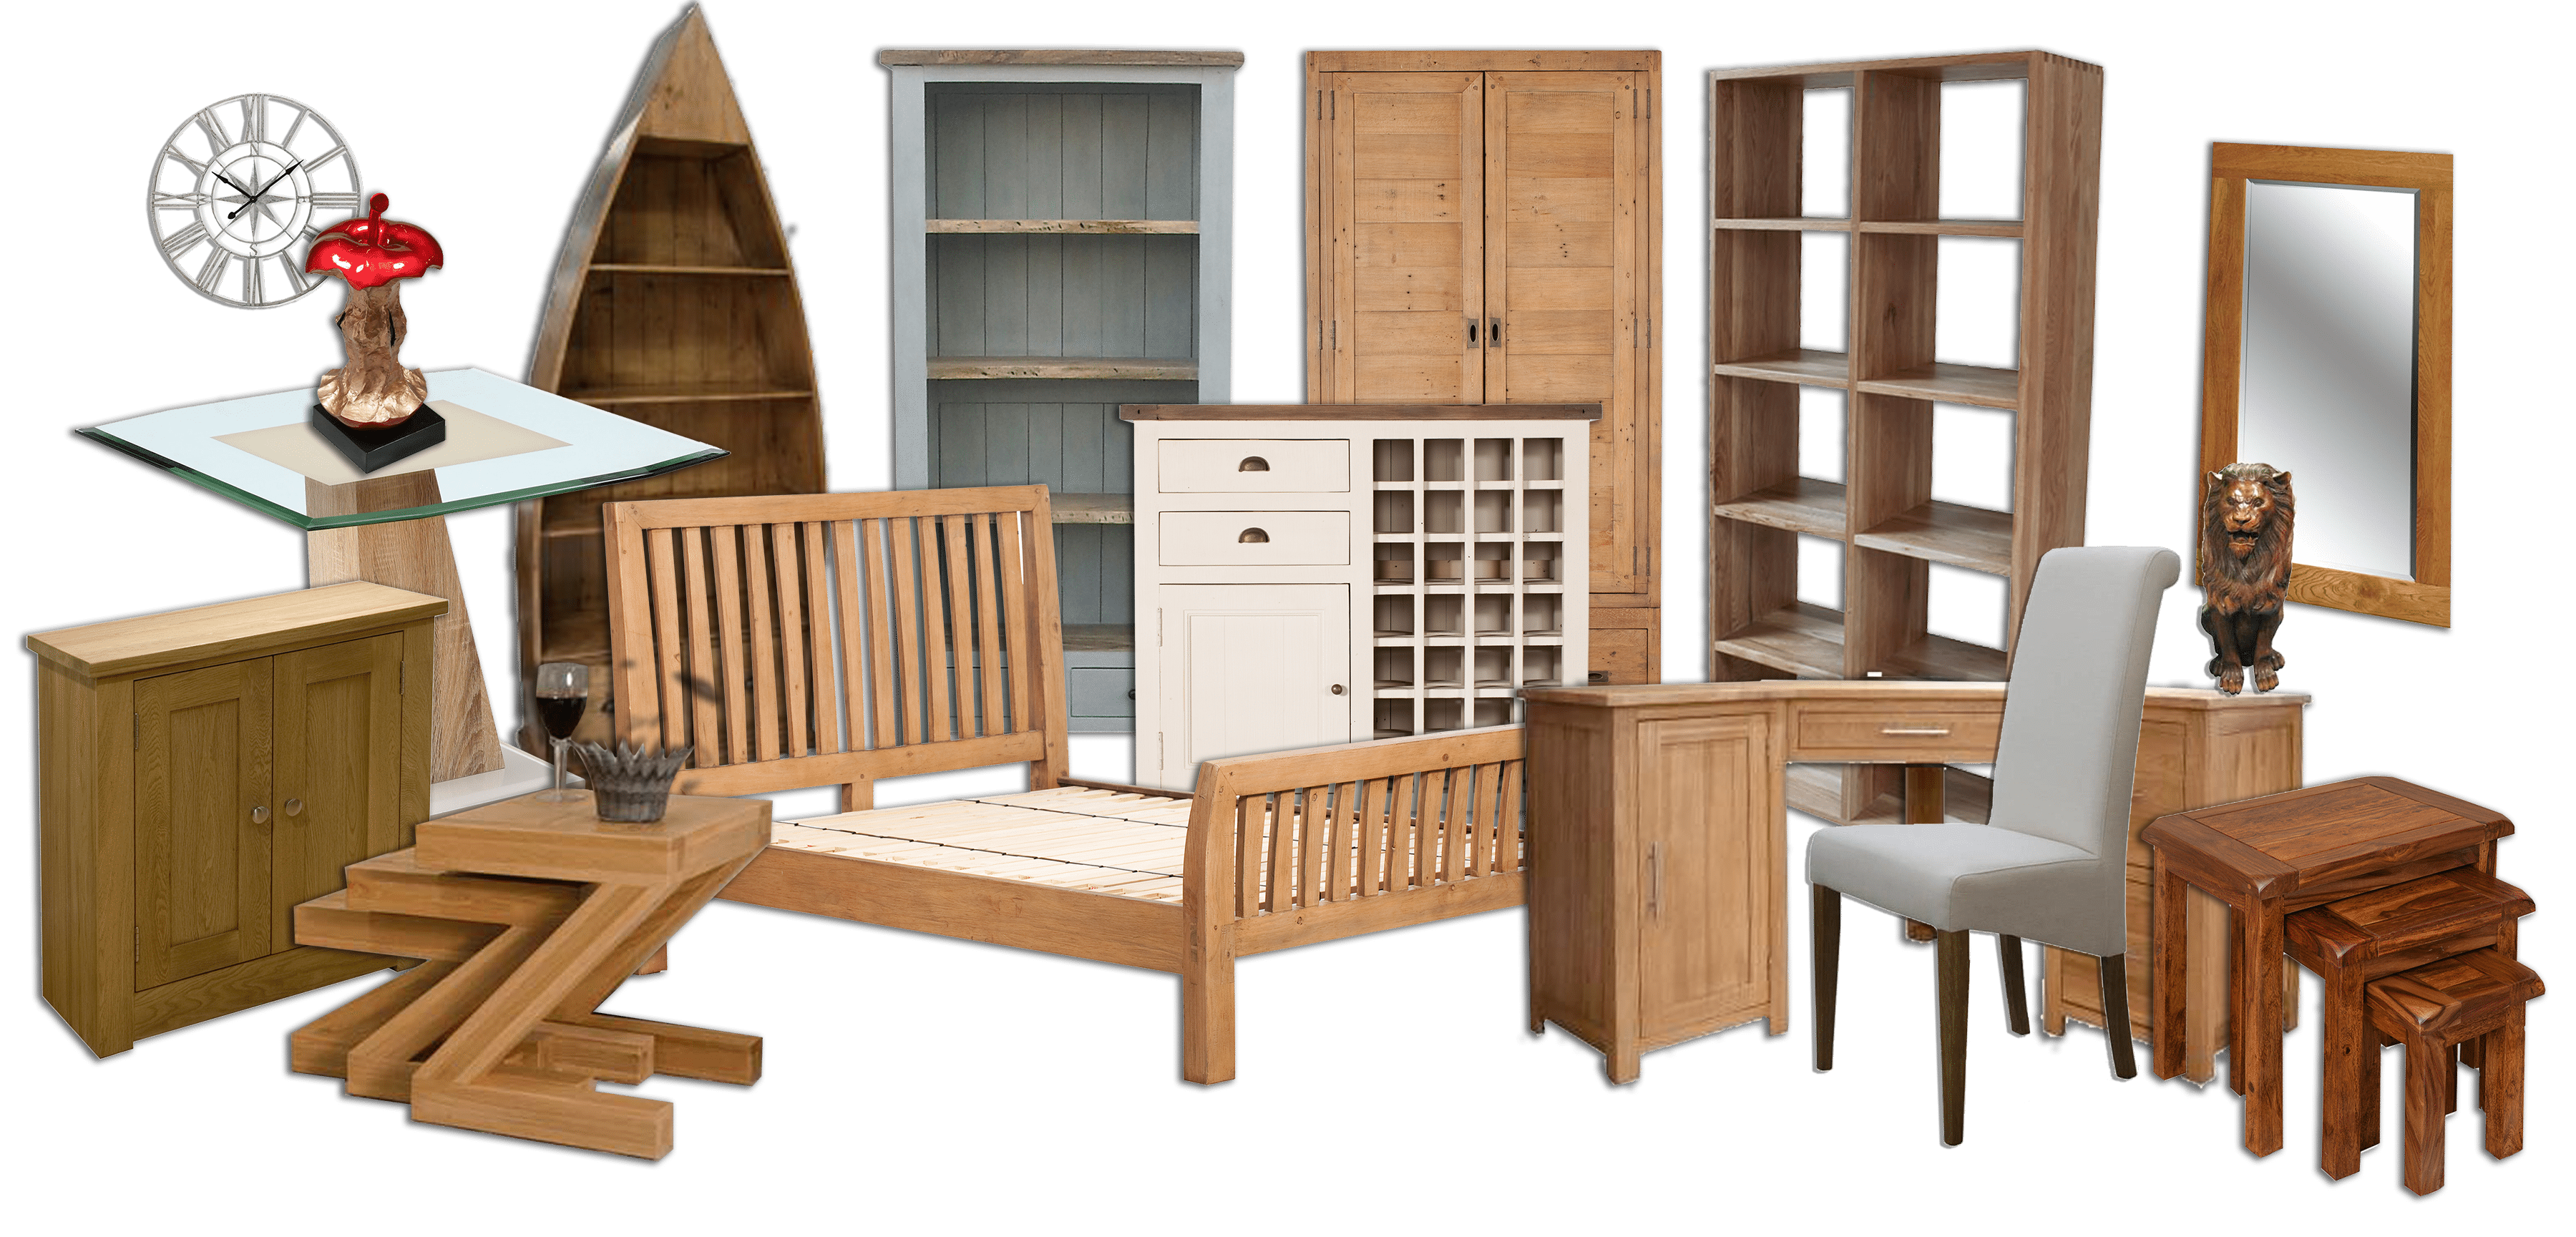 Wooden Furniture Hd Images